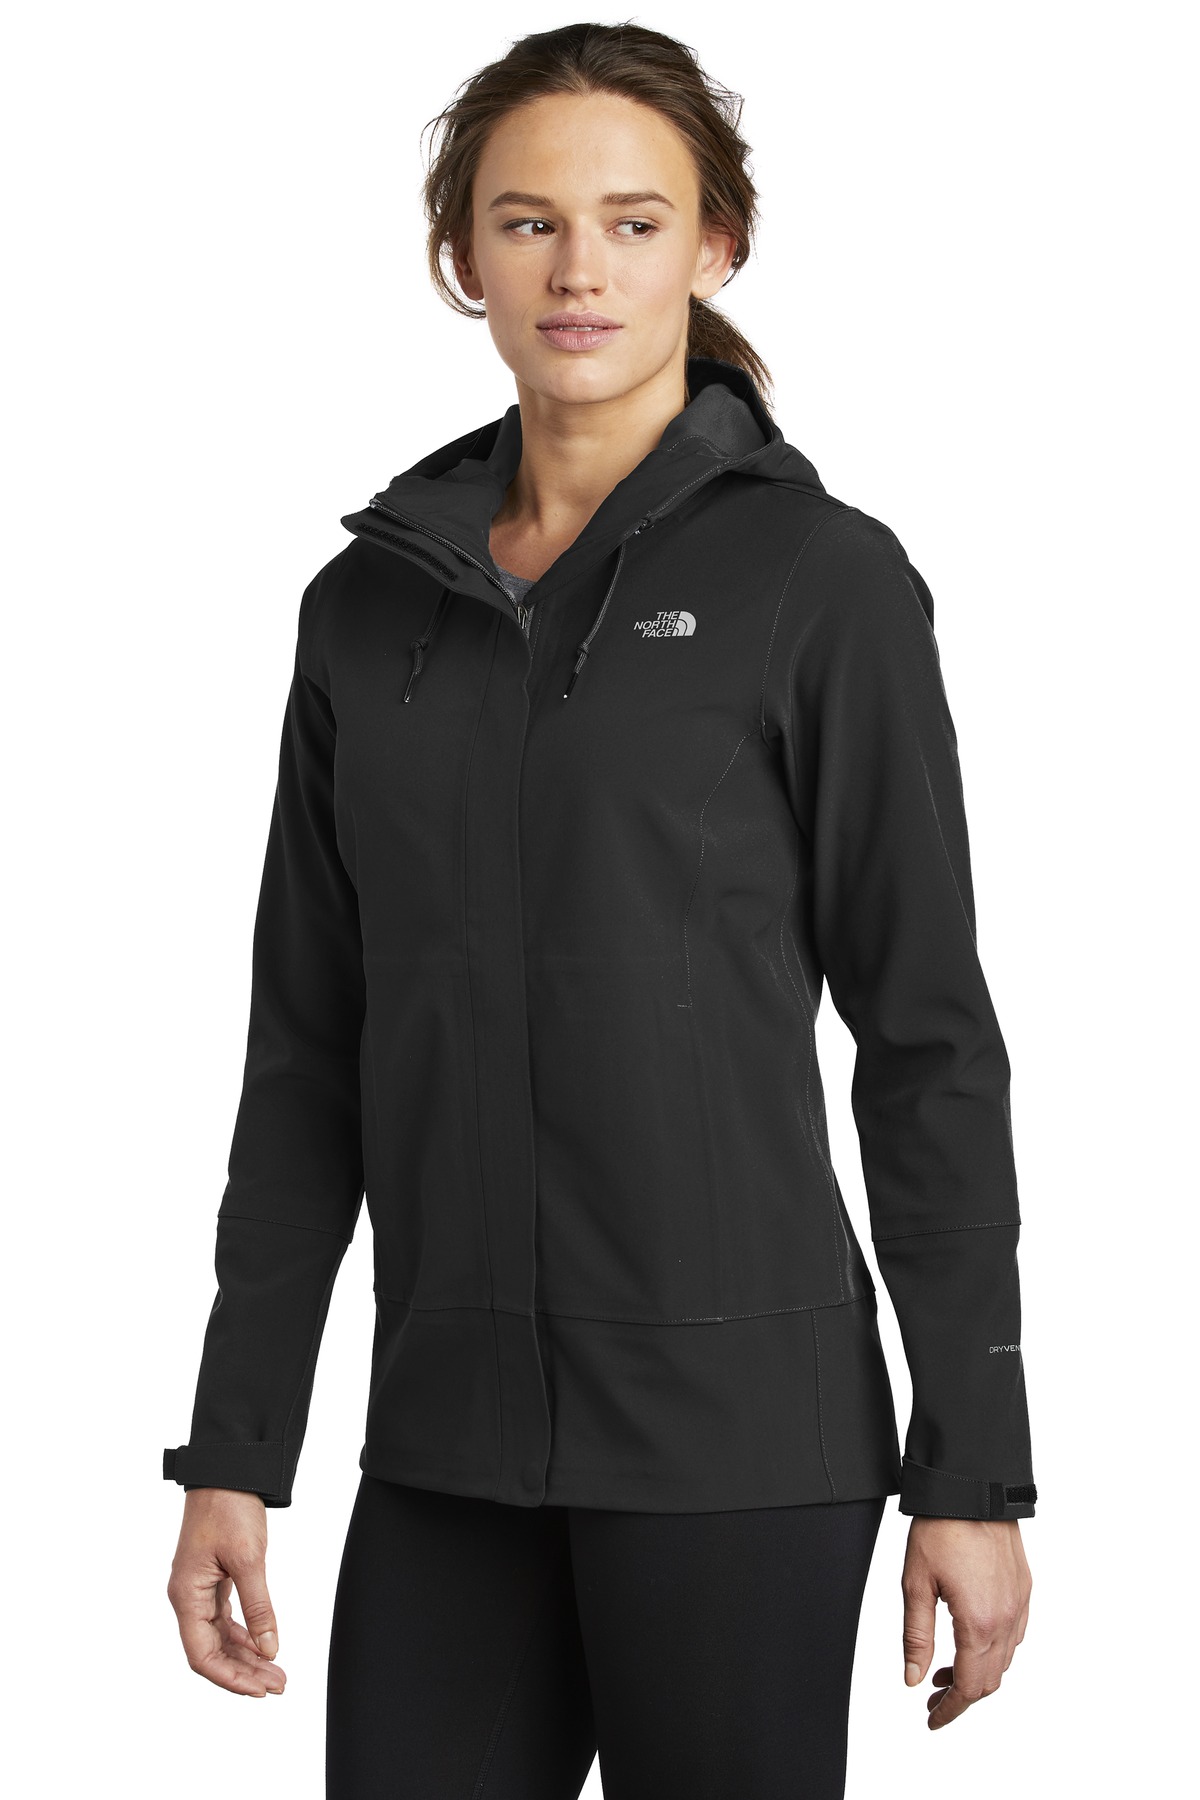 The North Face Ladies Apex DryVent Jacket NF0A47FJ | Blank Apparel by ZOME